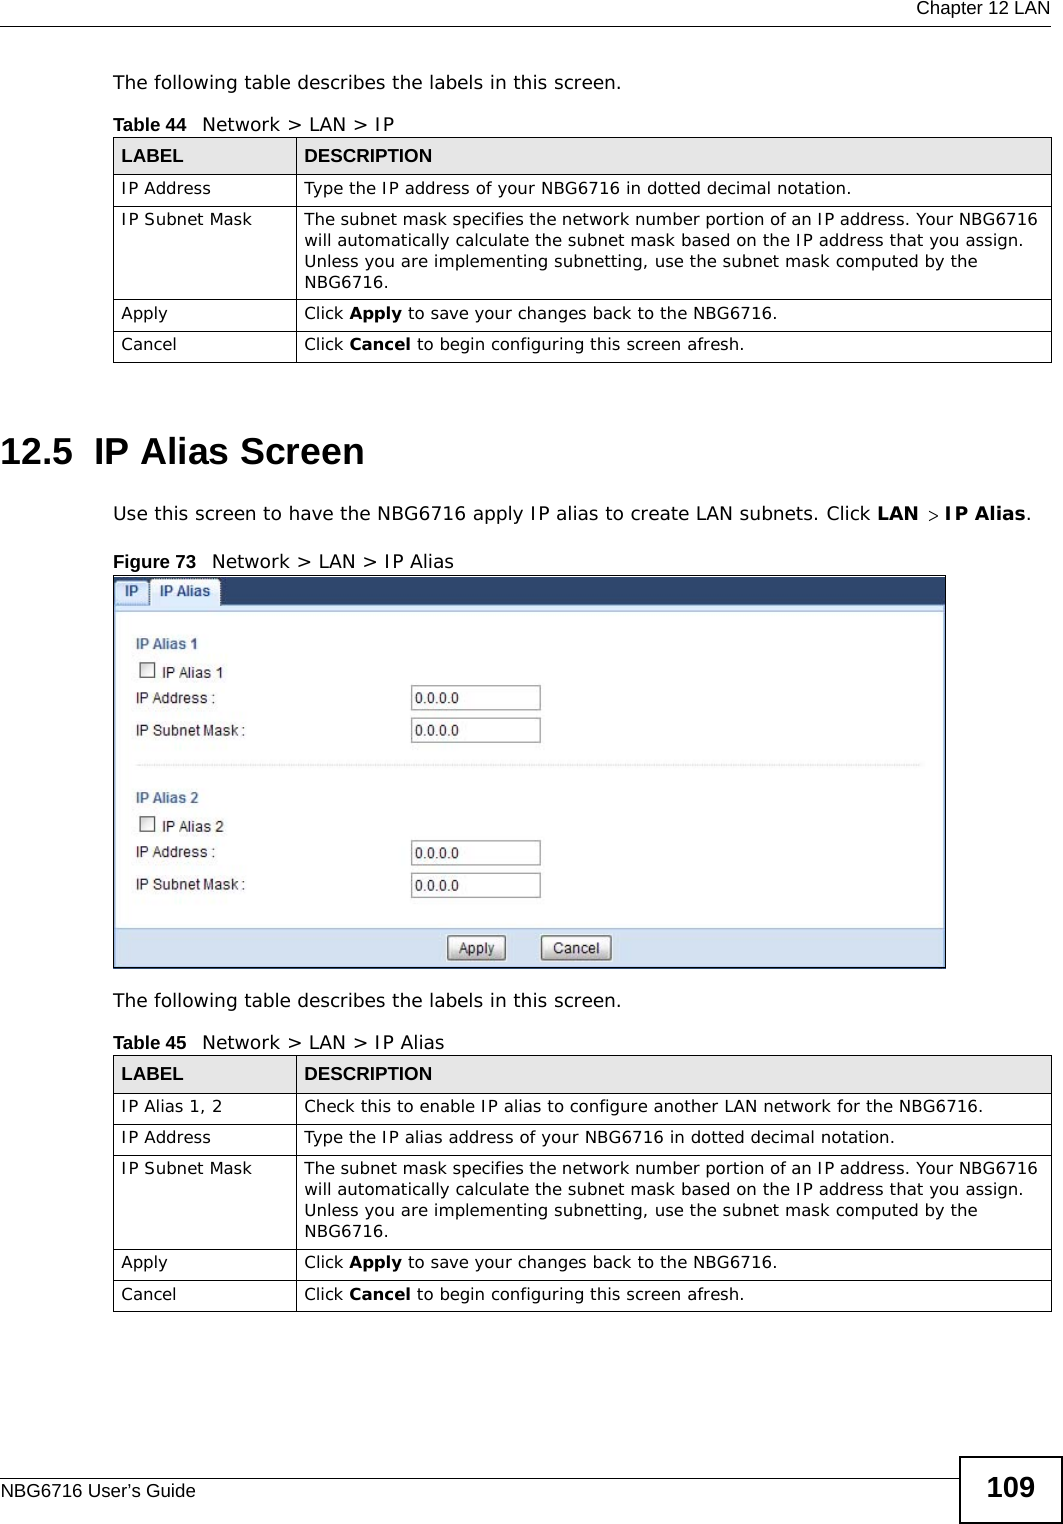  Chapter 12 LANNBG6716 User’s Guide 109The following table describes the labels in this screen.12.5  IP Alias ScreenUse this screen to have the NBG6716 apply IP alias to create LAN subnets. Click LAN &gt; IP Alias.Figure 73   Network &gt; LAN &gt; IP Alias The following table describes the labels in this screen.Table 44   Network &gt; LAN &gt; IPLABEL DESCRIPTIONIP Address Type the IP address of your NBG6716 in dotted decimal notation.IP Subnet Mask The subnet mask specifies the network number portion of an IP address. Your NBG6716 will automatically calculate the subnet mask based on the IP address that you assign. Unless you are implementing subnetting, use the subnet mask computed by the NBG6716.Apply Click Apply to save your changes back to the NBG6716.Cancel Click Cancel to begin configuring this screen afresh.Table 45   Network &gt; LAN &gt; IP AliasLABEL DESCRIPTIONIP Alias 1, 2 Check this to enable IP alias to configure another LAN network for the NBG6716.IP Address Type the IP alias address of your NBG6716 in dotted decimal notation.IP Subnet Mask The subnet mask specifies the network number portion of an IP address. Your NBG6716 will automatically calculate the subnet mask based on the IP address that you assign. Unless you are implementing subnetting, use the subnet mask computed by the NBG6716.Apply Click Apply to save your changes back to the NBG6716.Cancel Click Cancel to begin configuring this screen afresh.